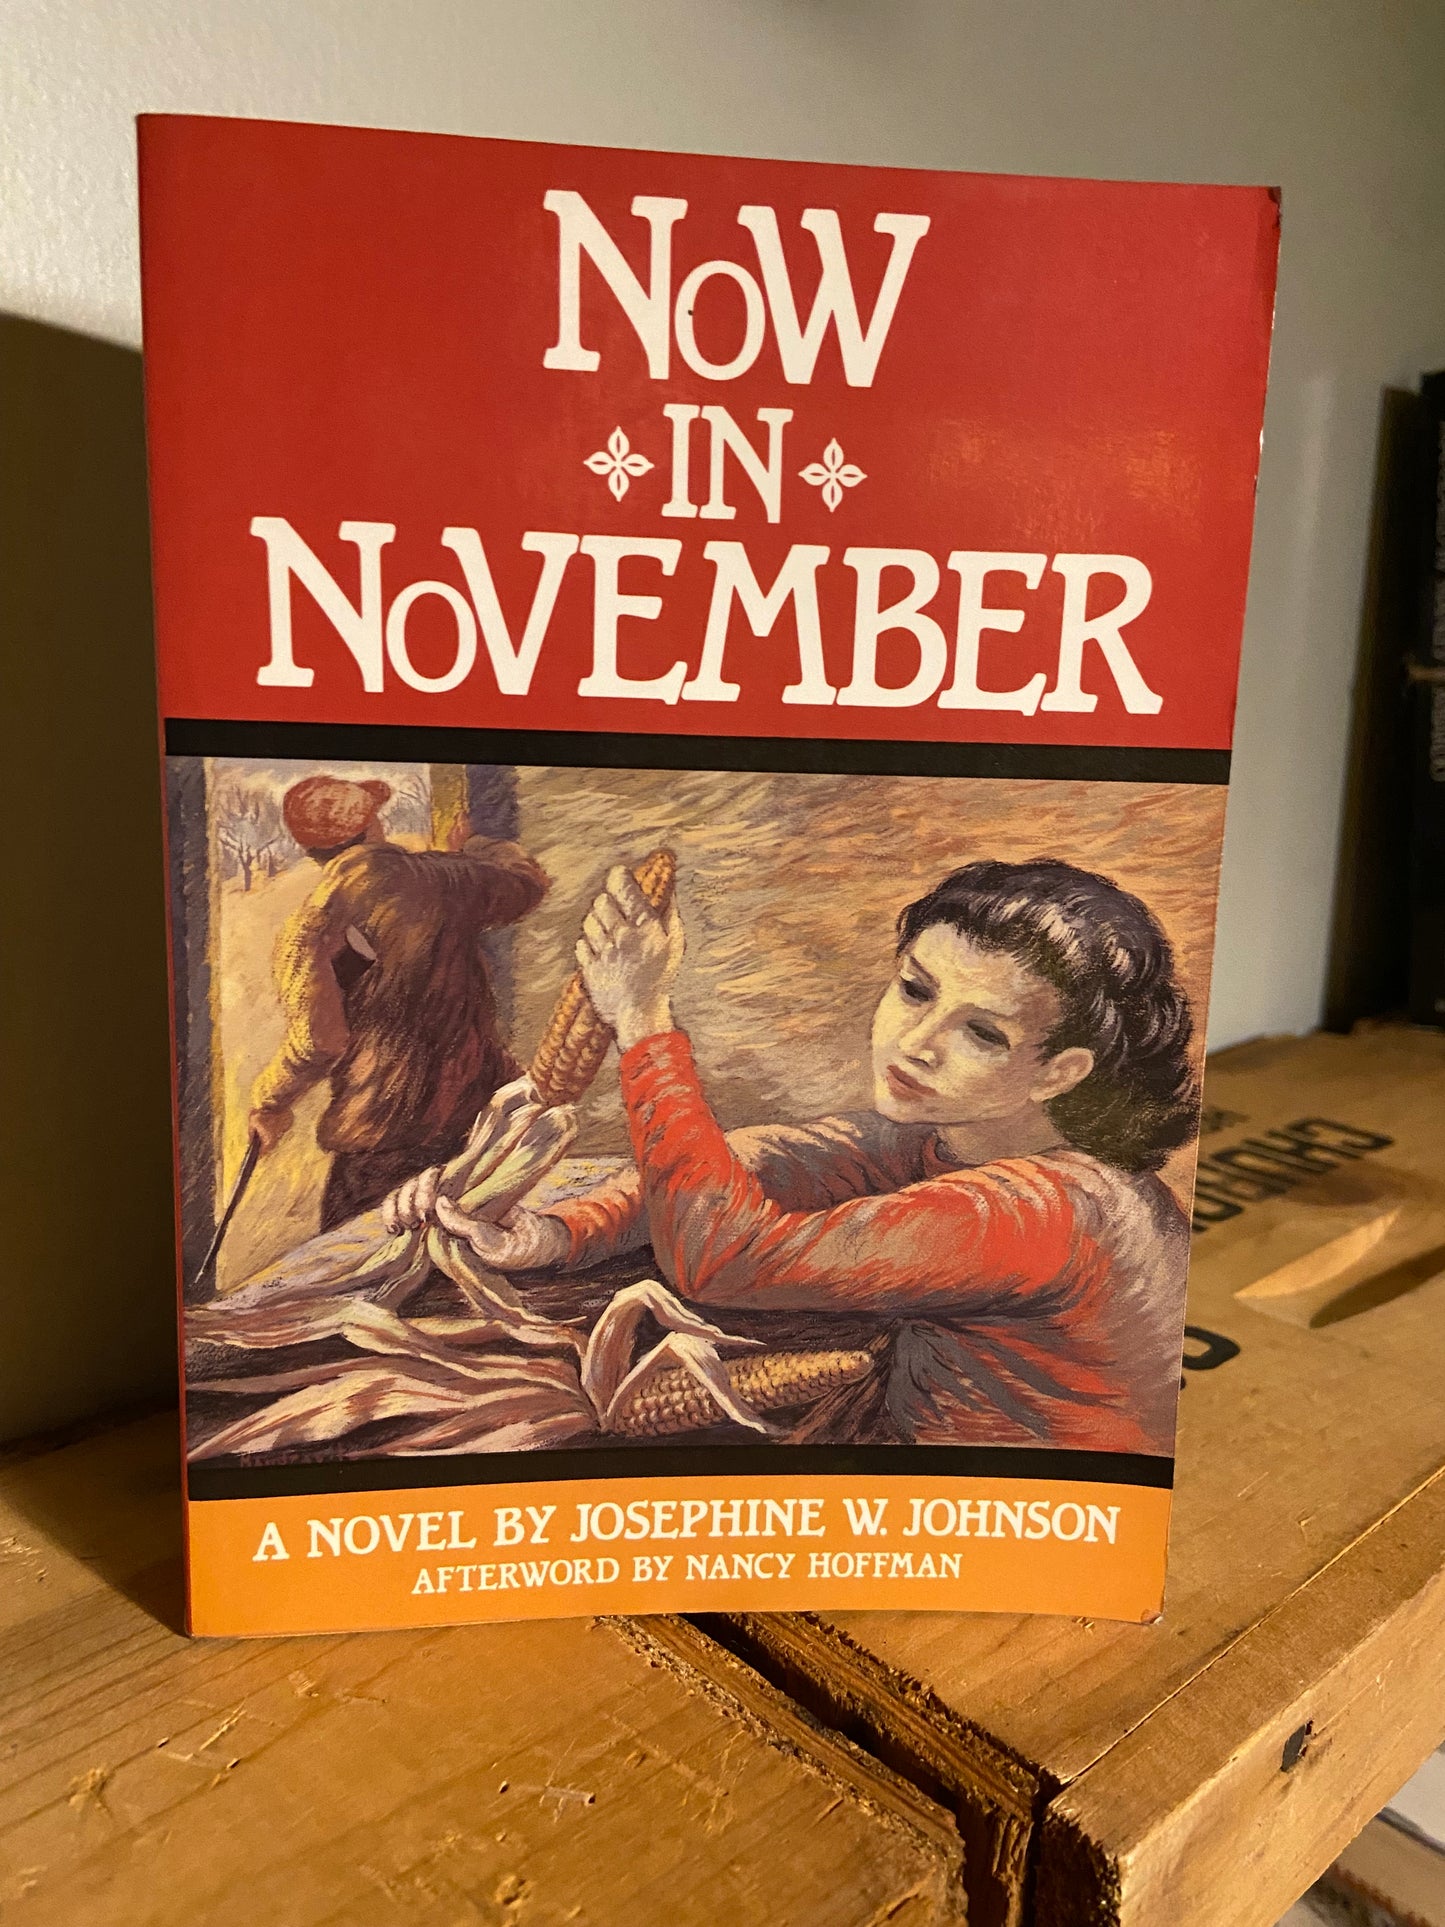 Now in November by Josephine W. Johnson